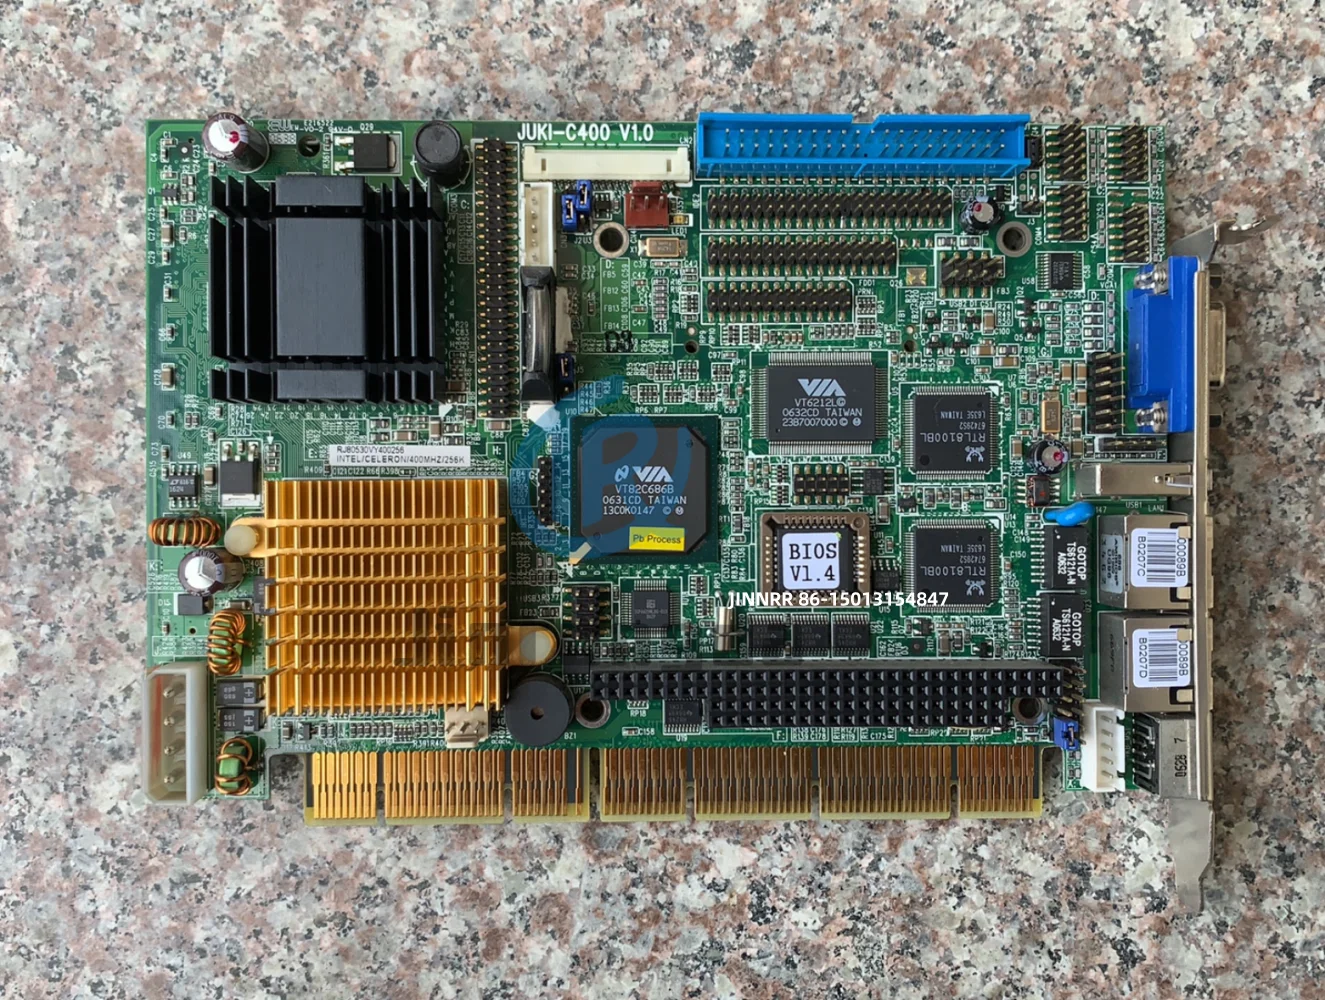 Original disassembly JUKI-C400R V1.0 industrial control motherboard JUKI-C400R package ready for use in stock